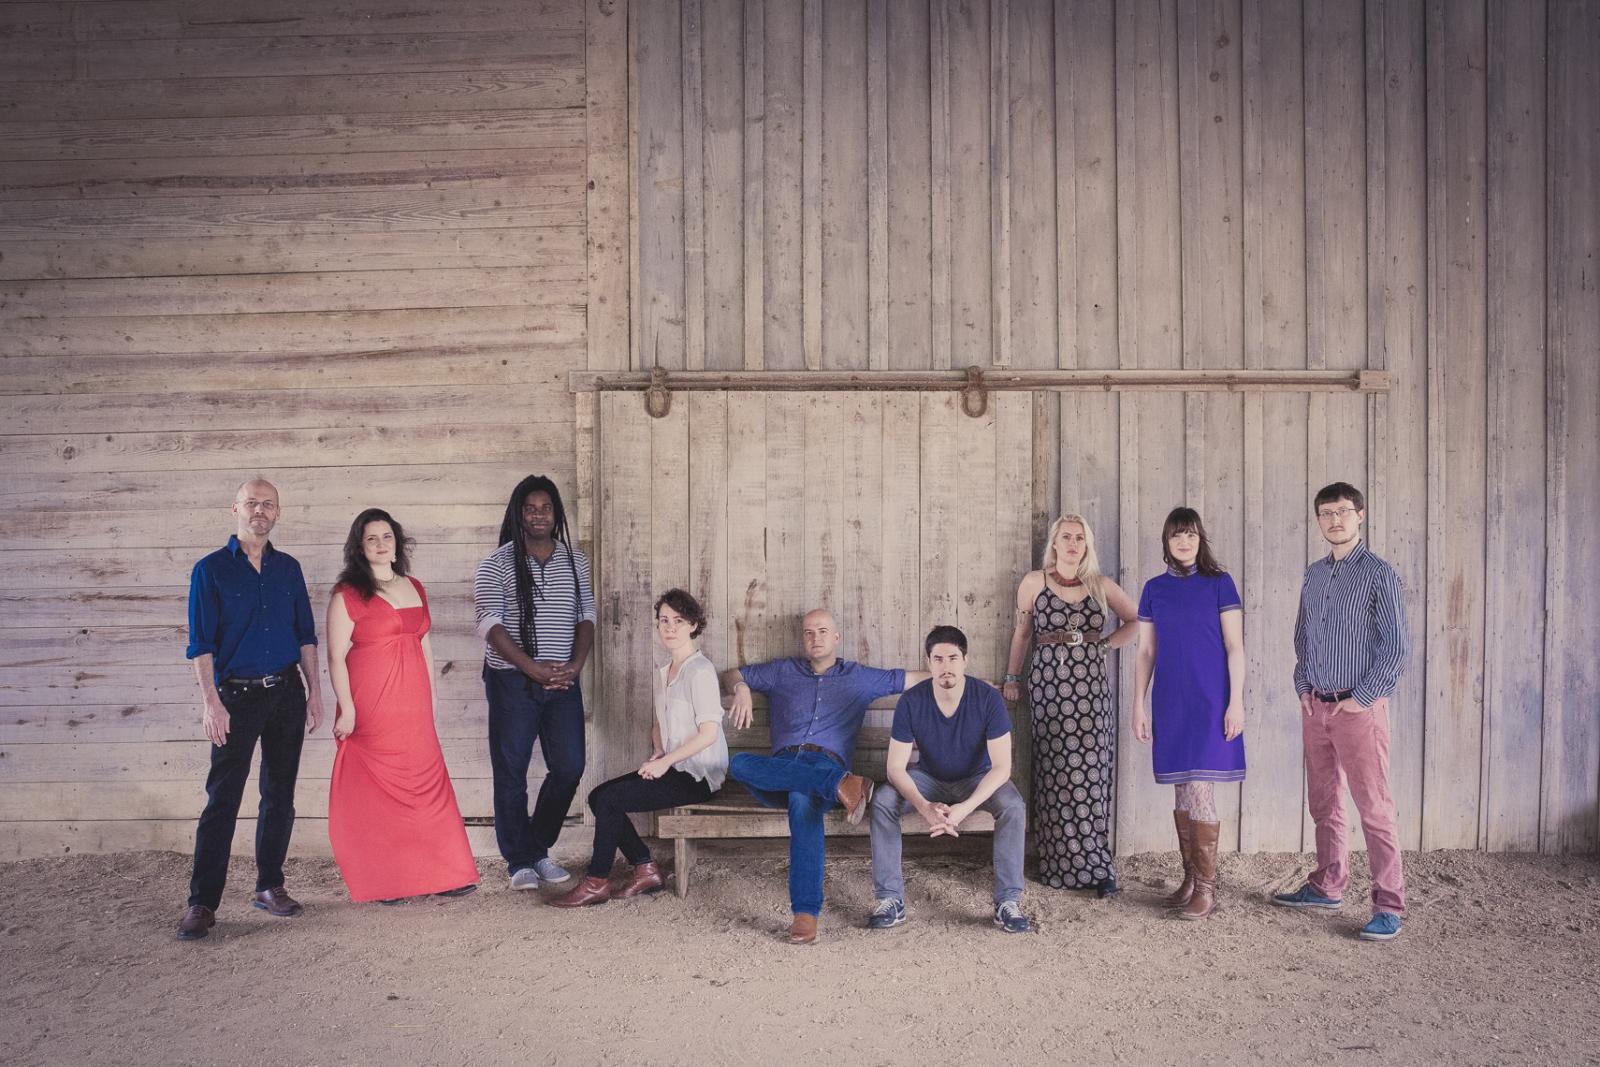 Nine members of the performing group Roomful of Teeth arranged in a line in front of a barn wall, center three performers seated. 